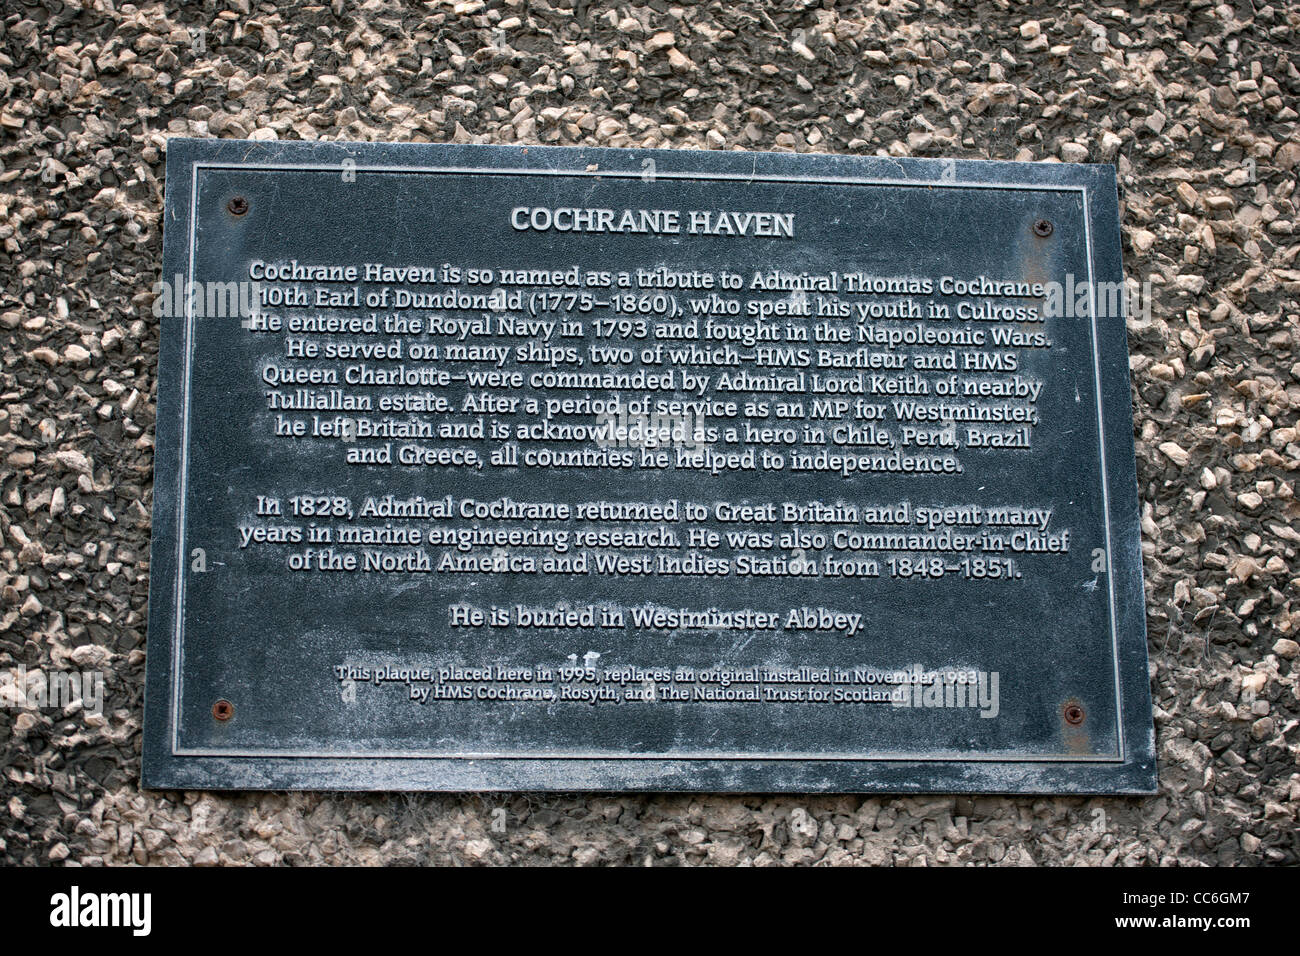 Cochrane Haven plaque outside a building in the Fife coastal town of Culross Stock Photo